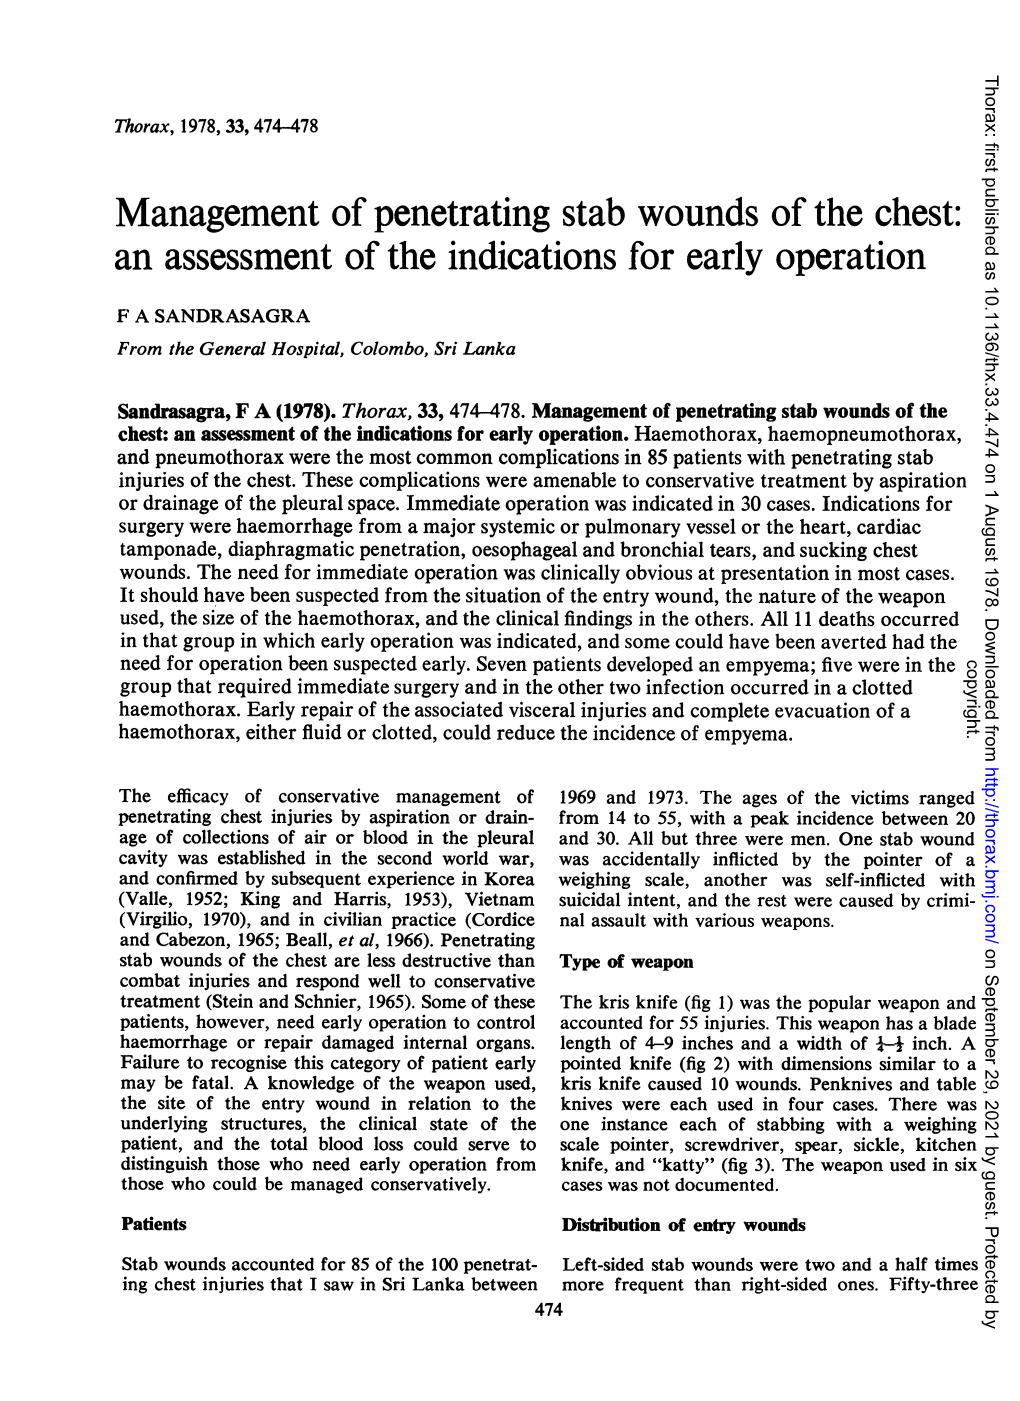 An Assessment of the Indications for Early Operation